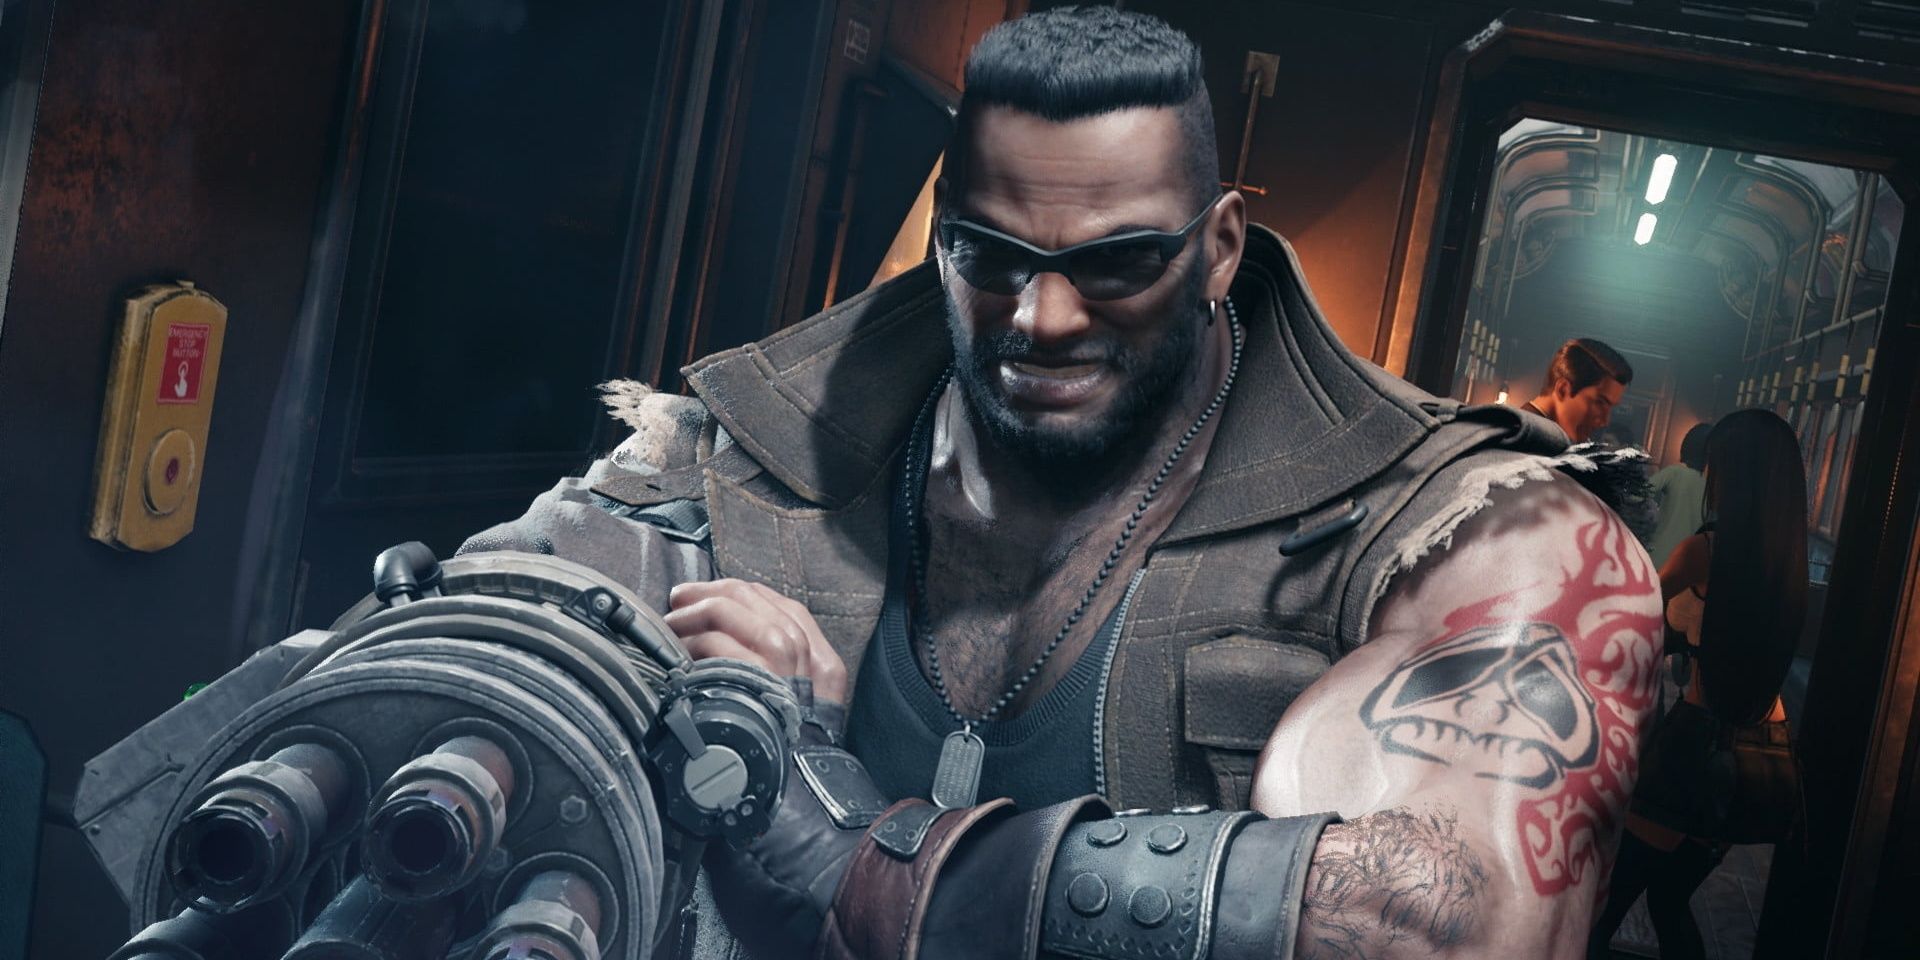 Final Fantasy 7 Remake Barret going to fight Shinra